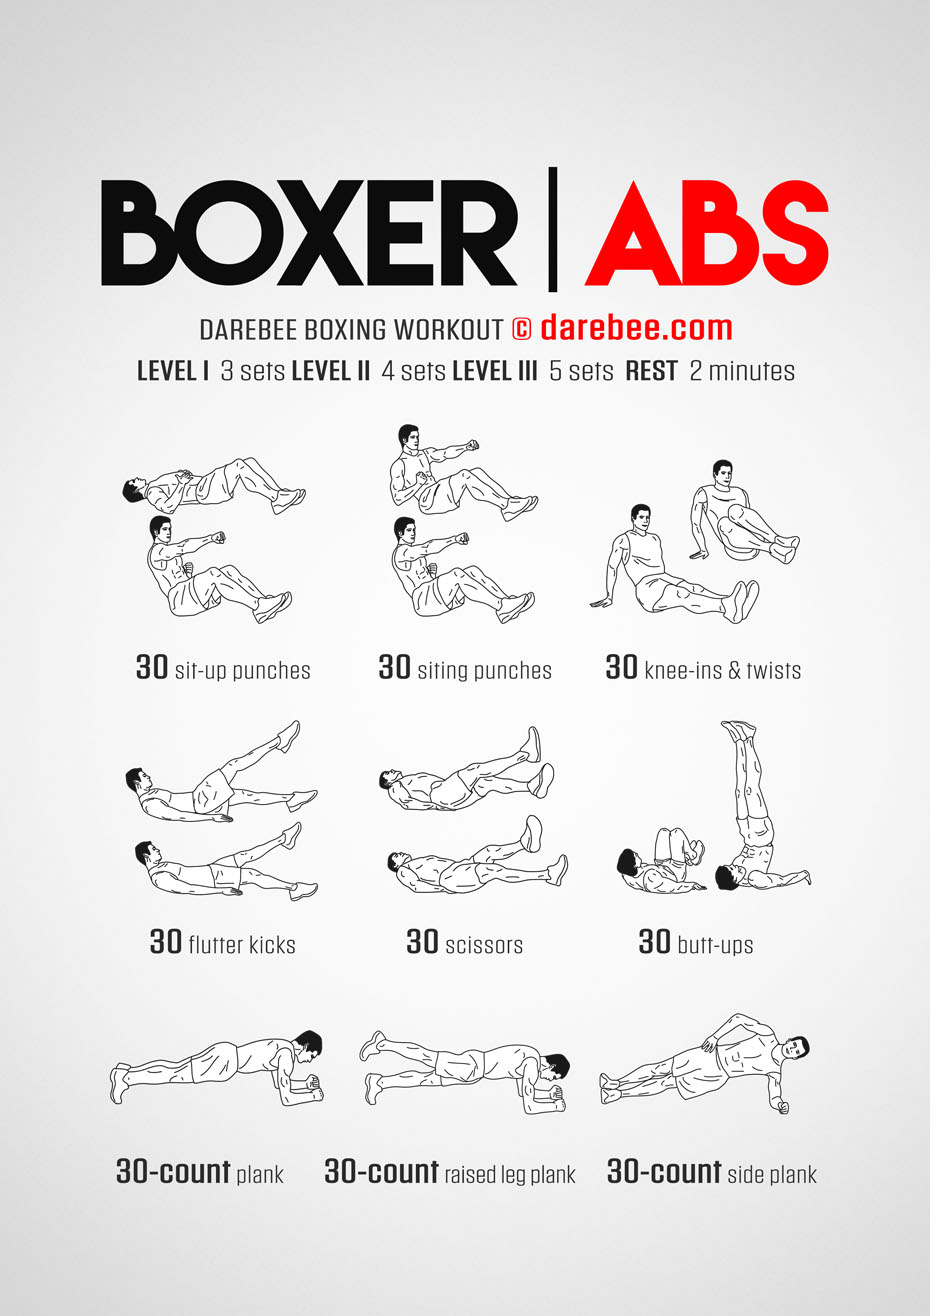 Do boxers get abs?